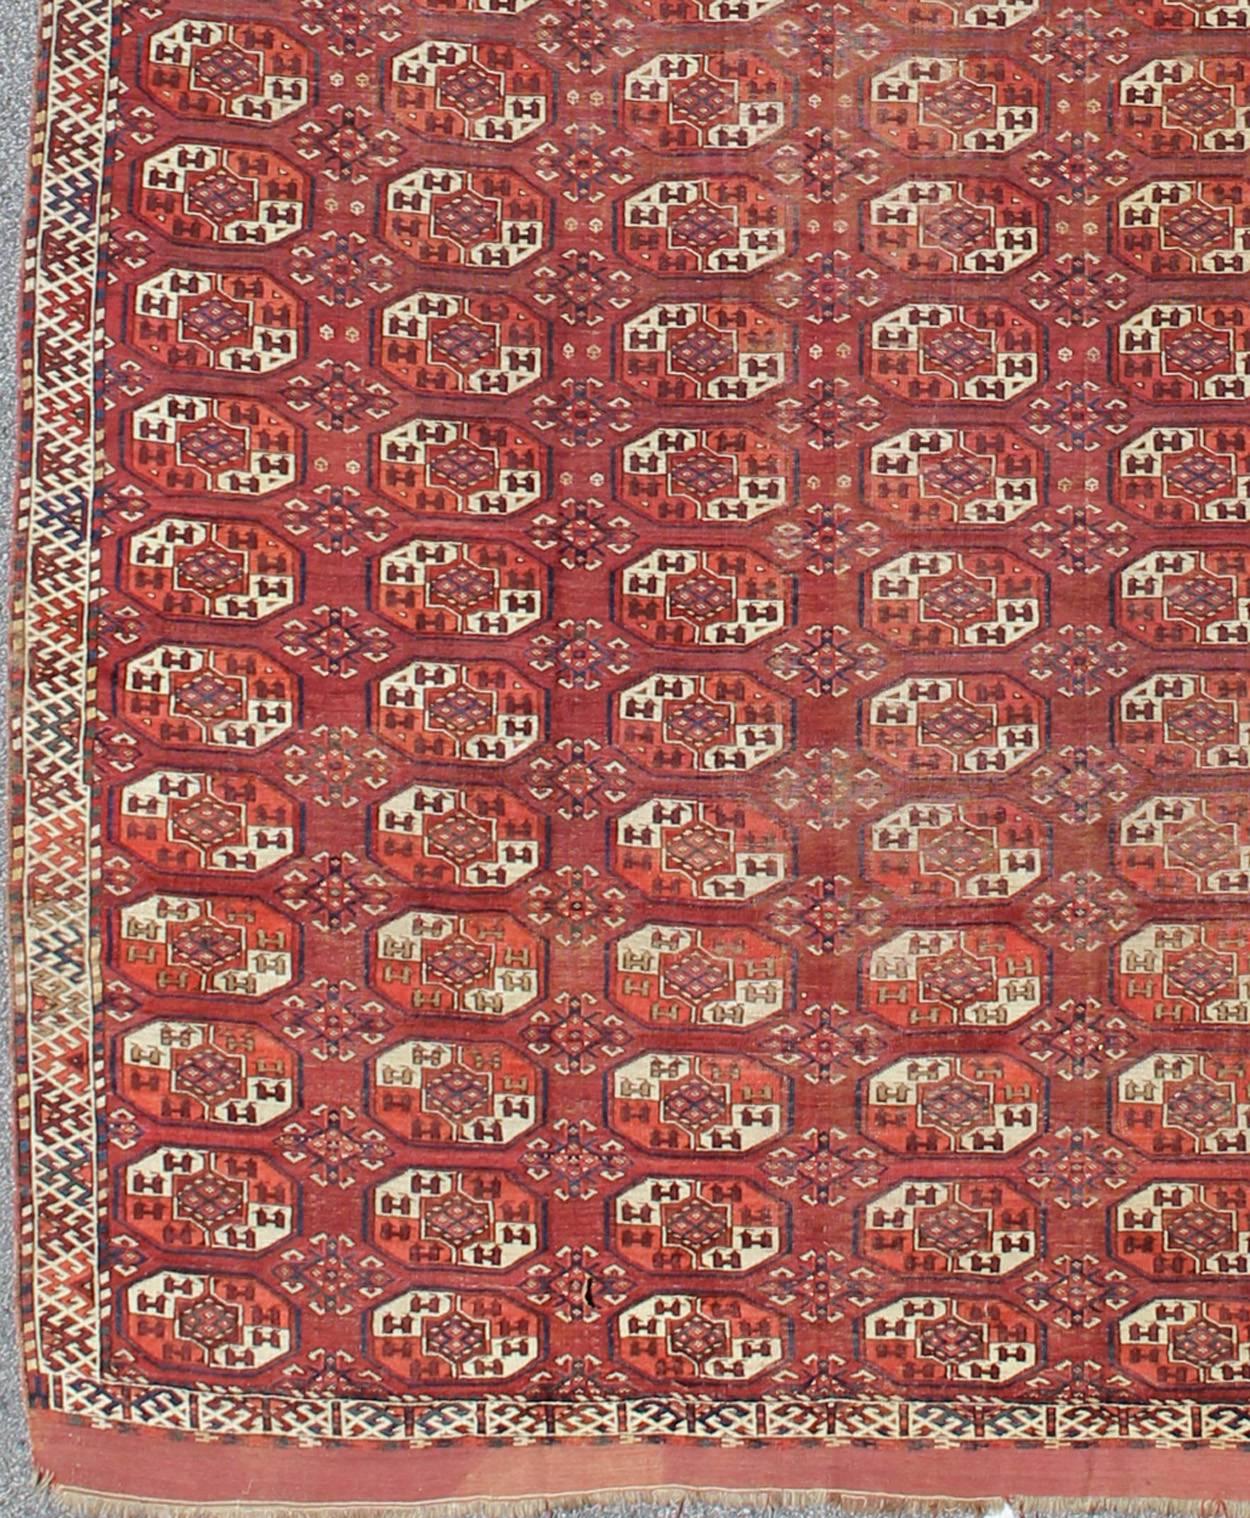 Extremely large antique gallery rug with red field and repeating Medallion design. Rug / J10-1105. Long Tekke gallery size.
This rare antique Tekke carpet displays warm and delightful red. The field consists motifs with red, orange, medium blue,